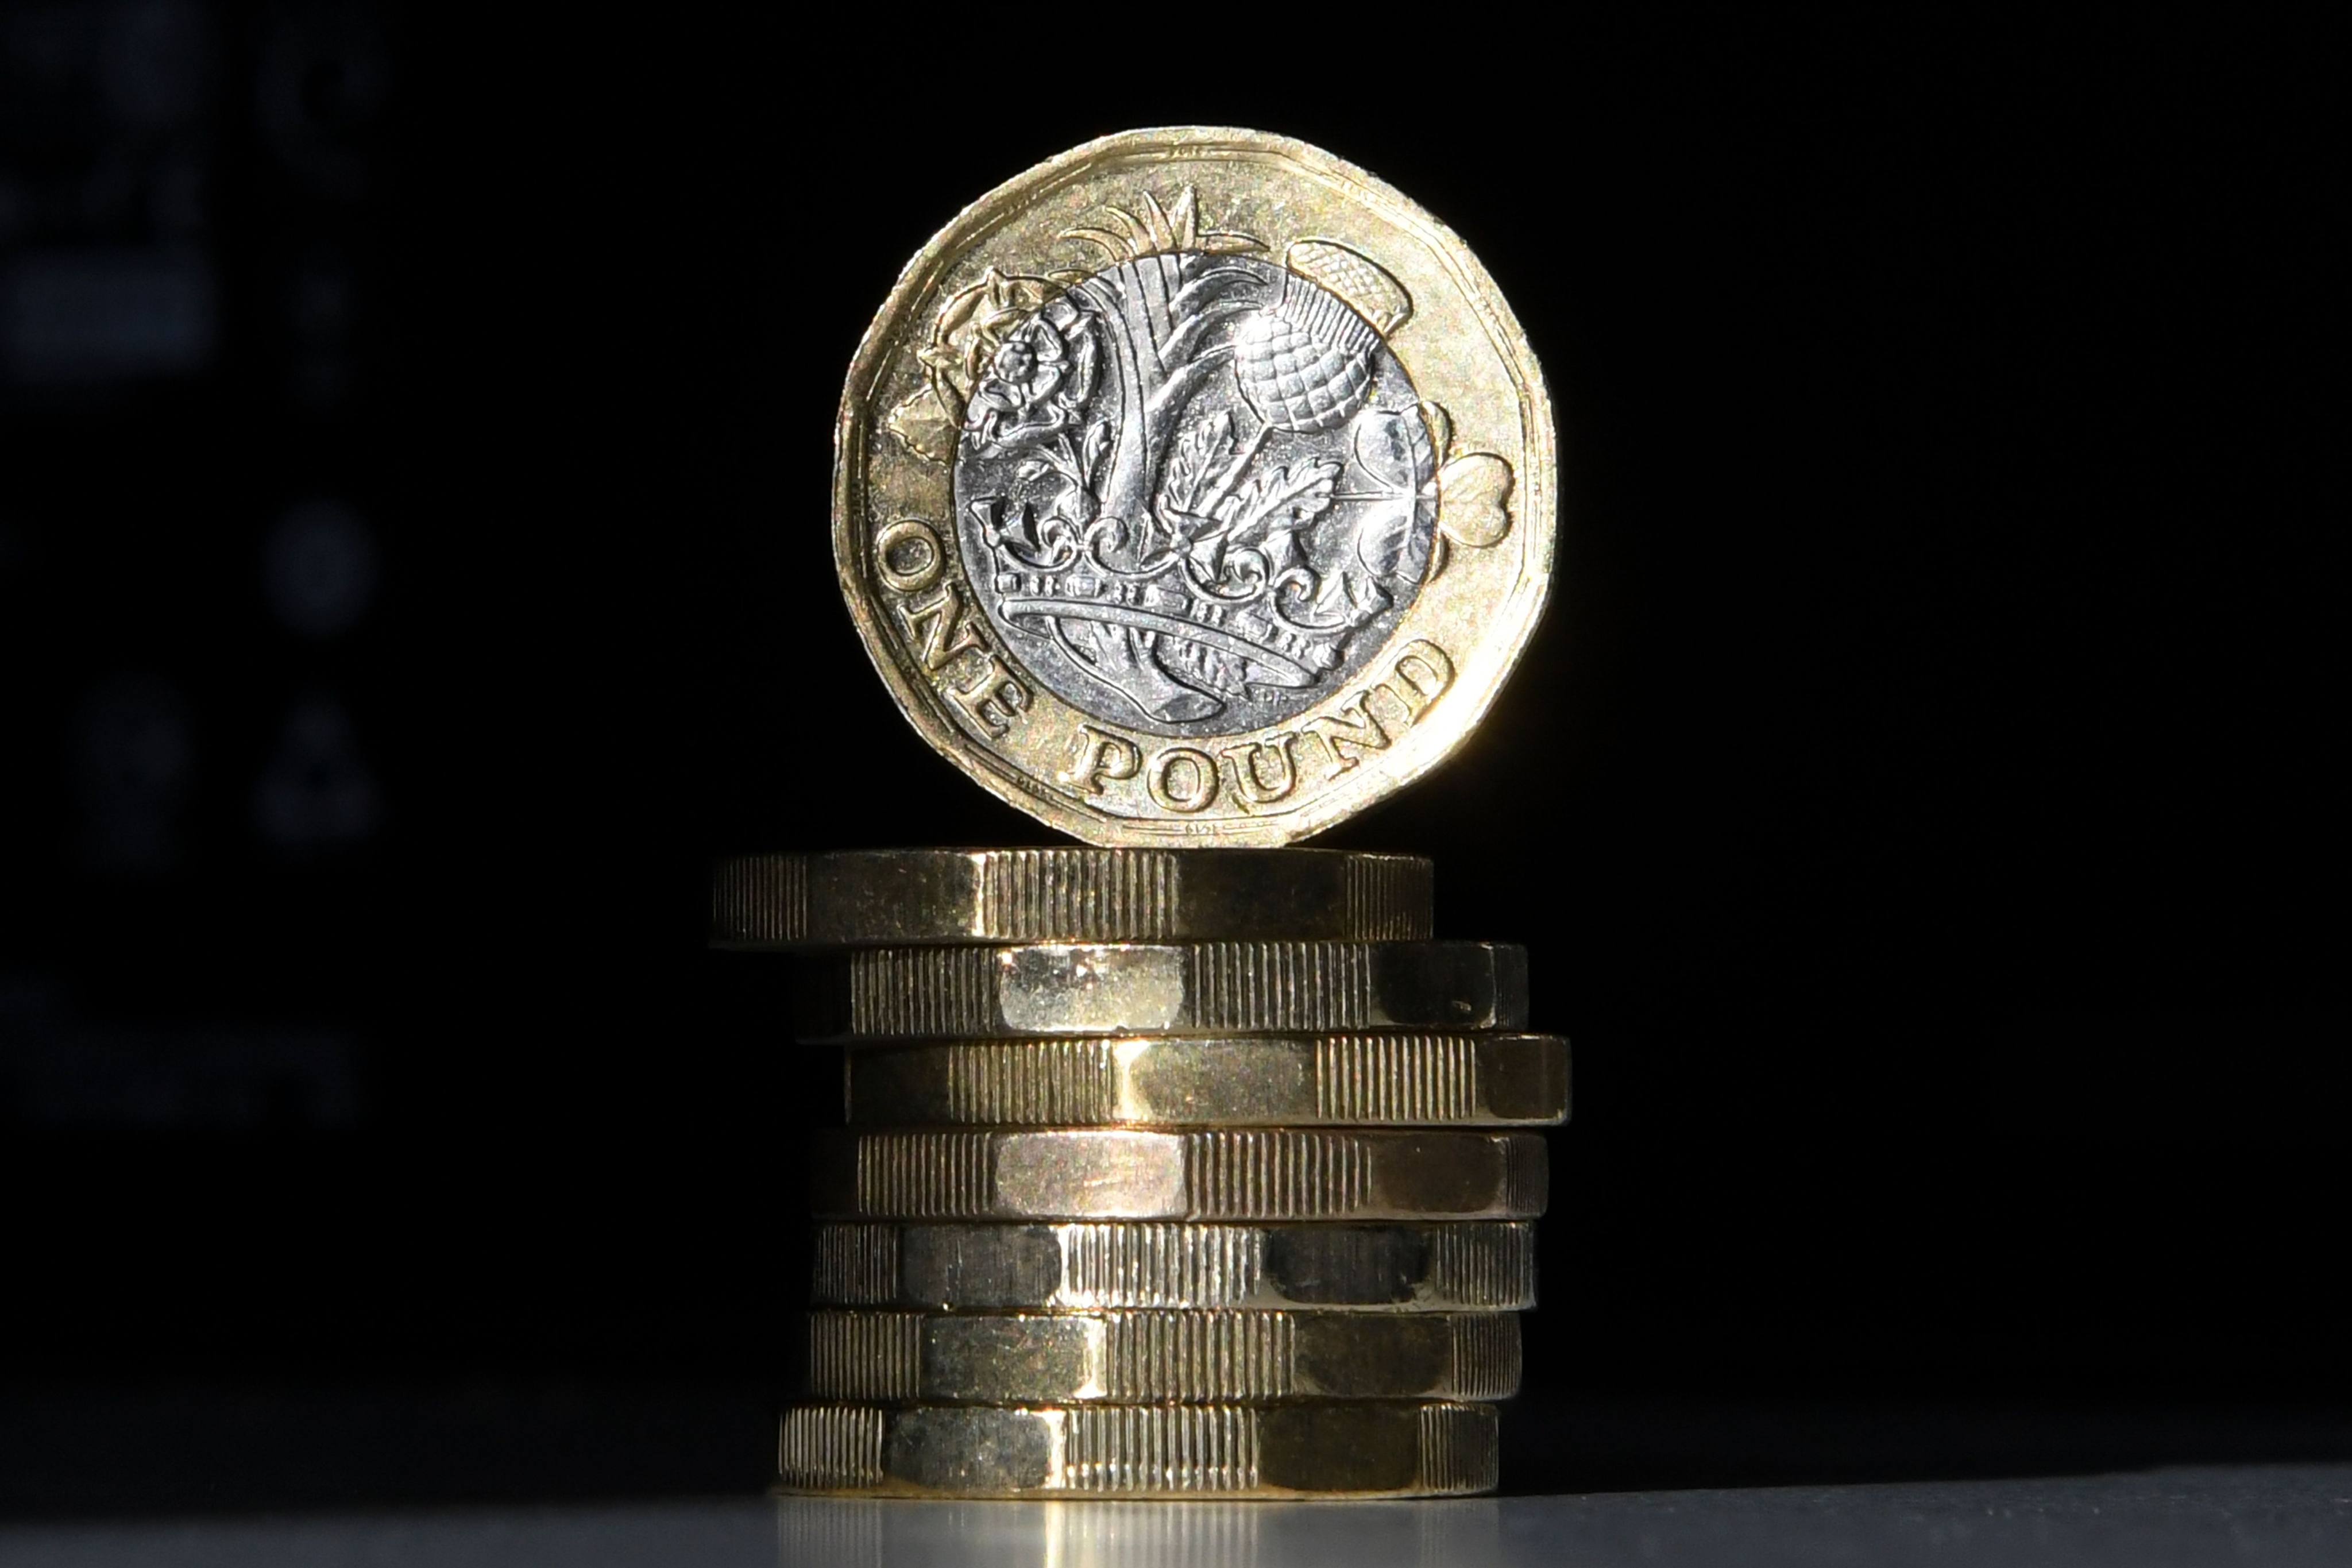 (FILES) This file photo taken on October 05, 2017 shows British one pound sterling coins arranged for a photograph in central London. Britain’s old one-pound coin is being phased out completely on October 15, 2017, but businesses complain they have been given too little time to switch to the new one and many are planning to defy the deadline. / AFP PHOTO / Daniel SORABJI